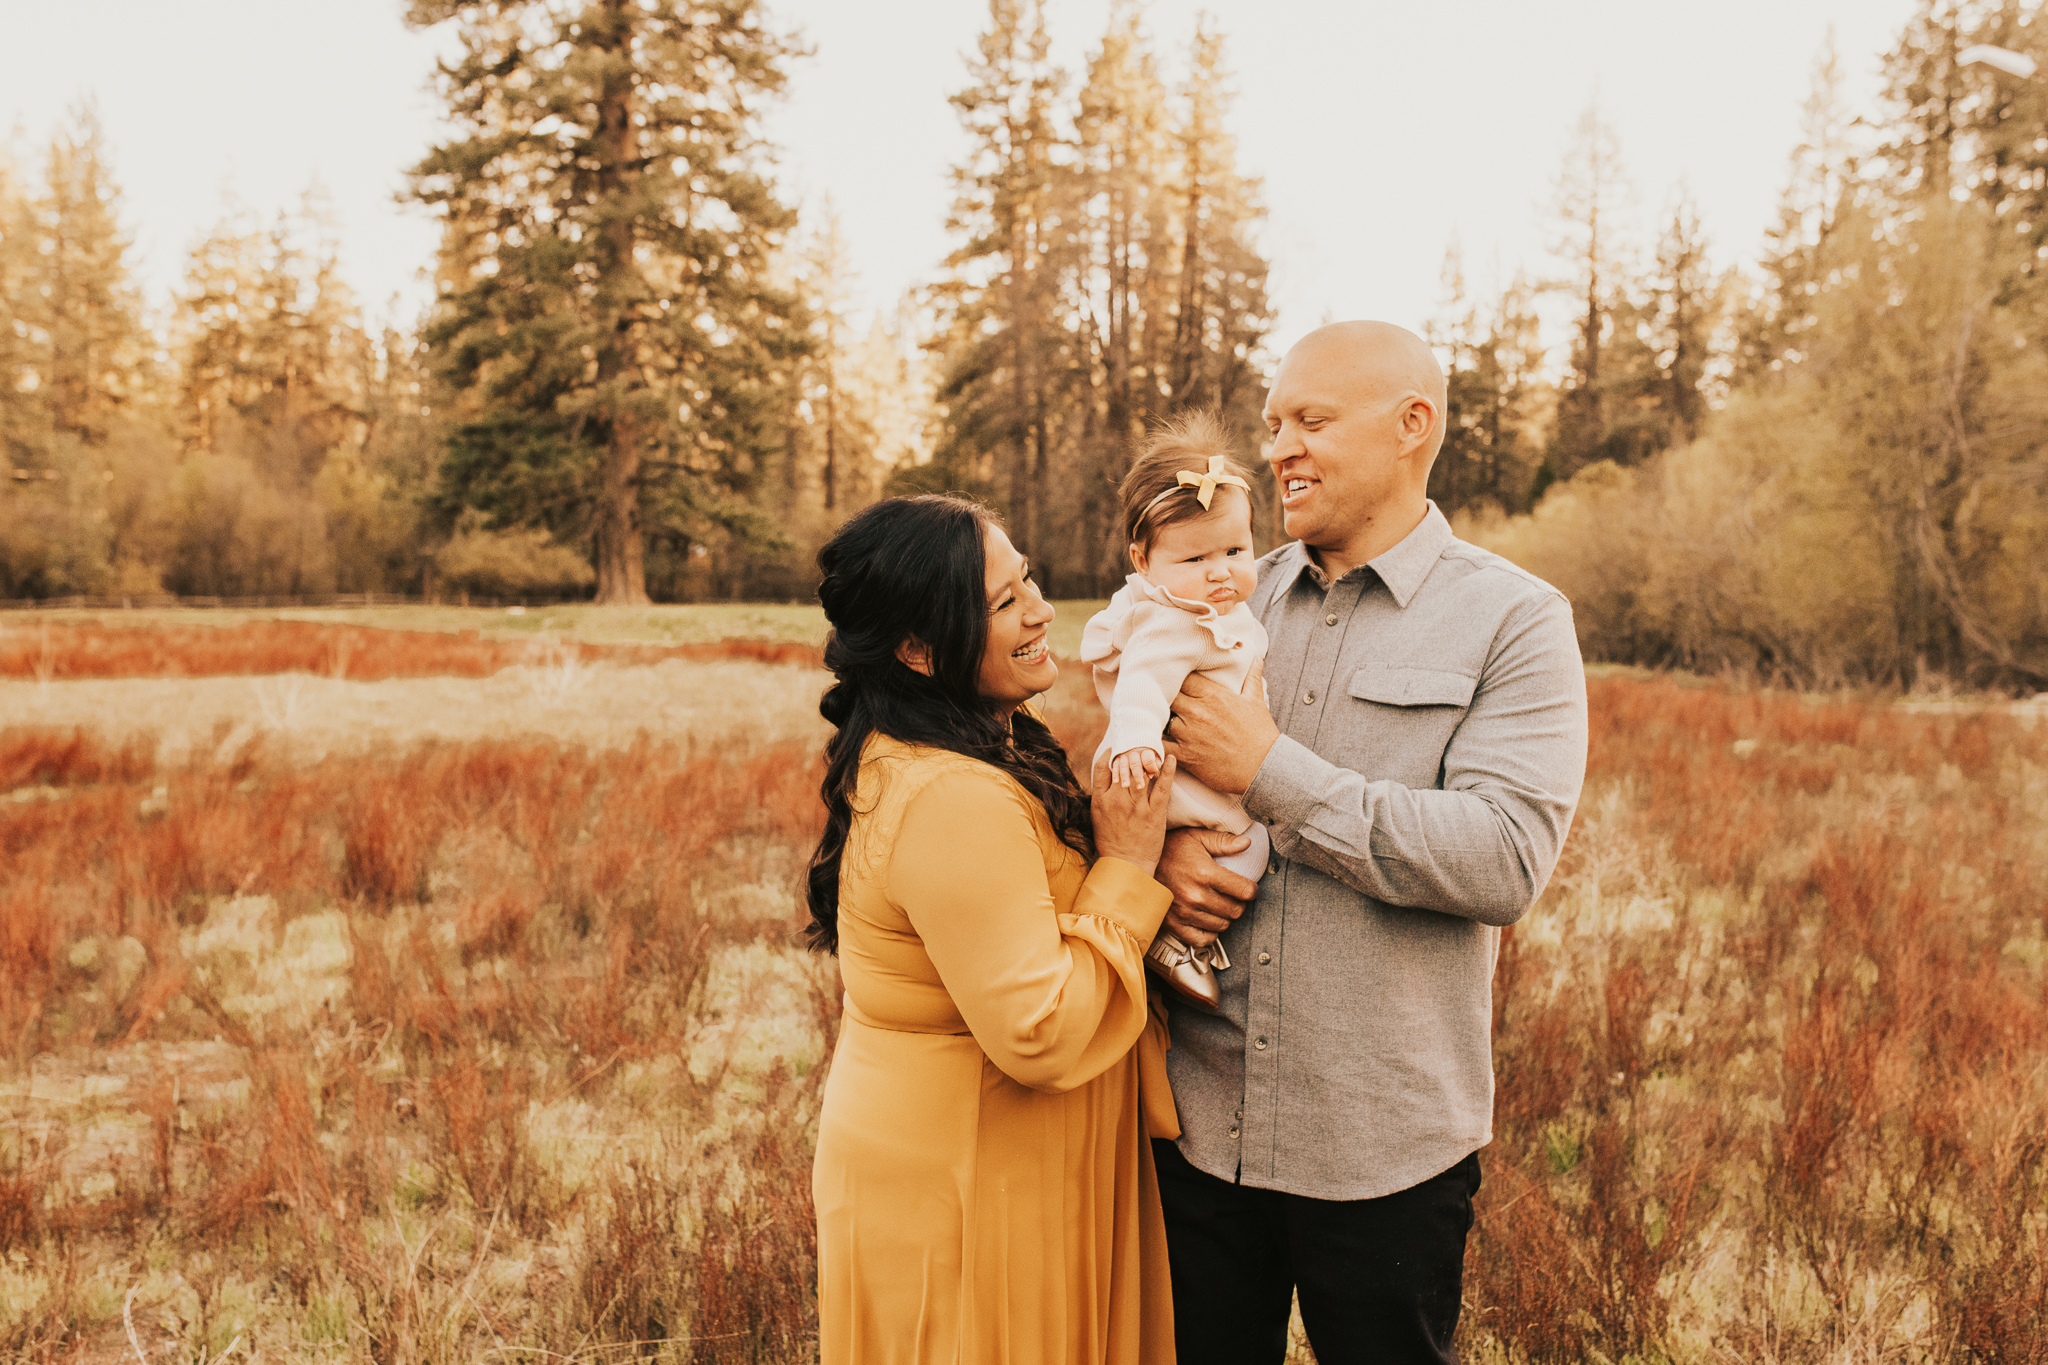 A family photoshoot in Idyllwild